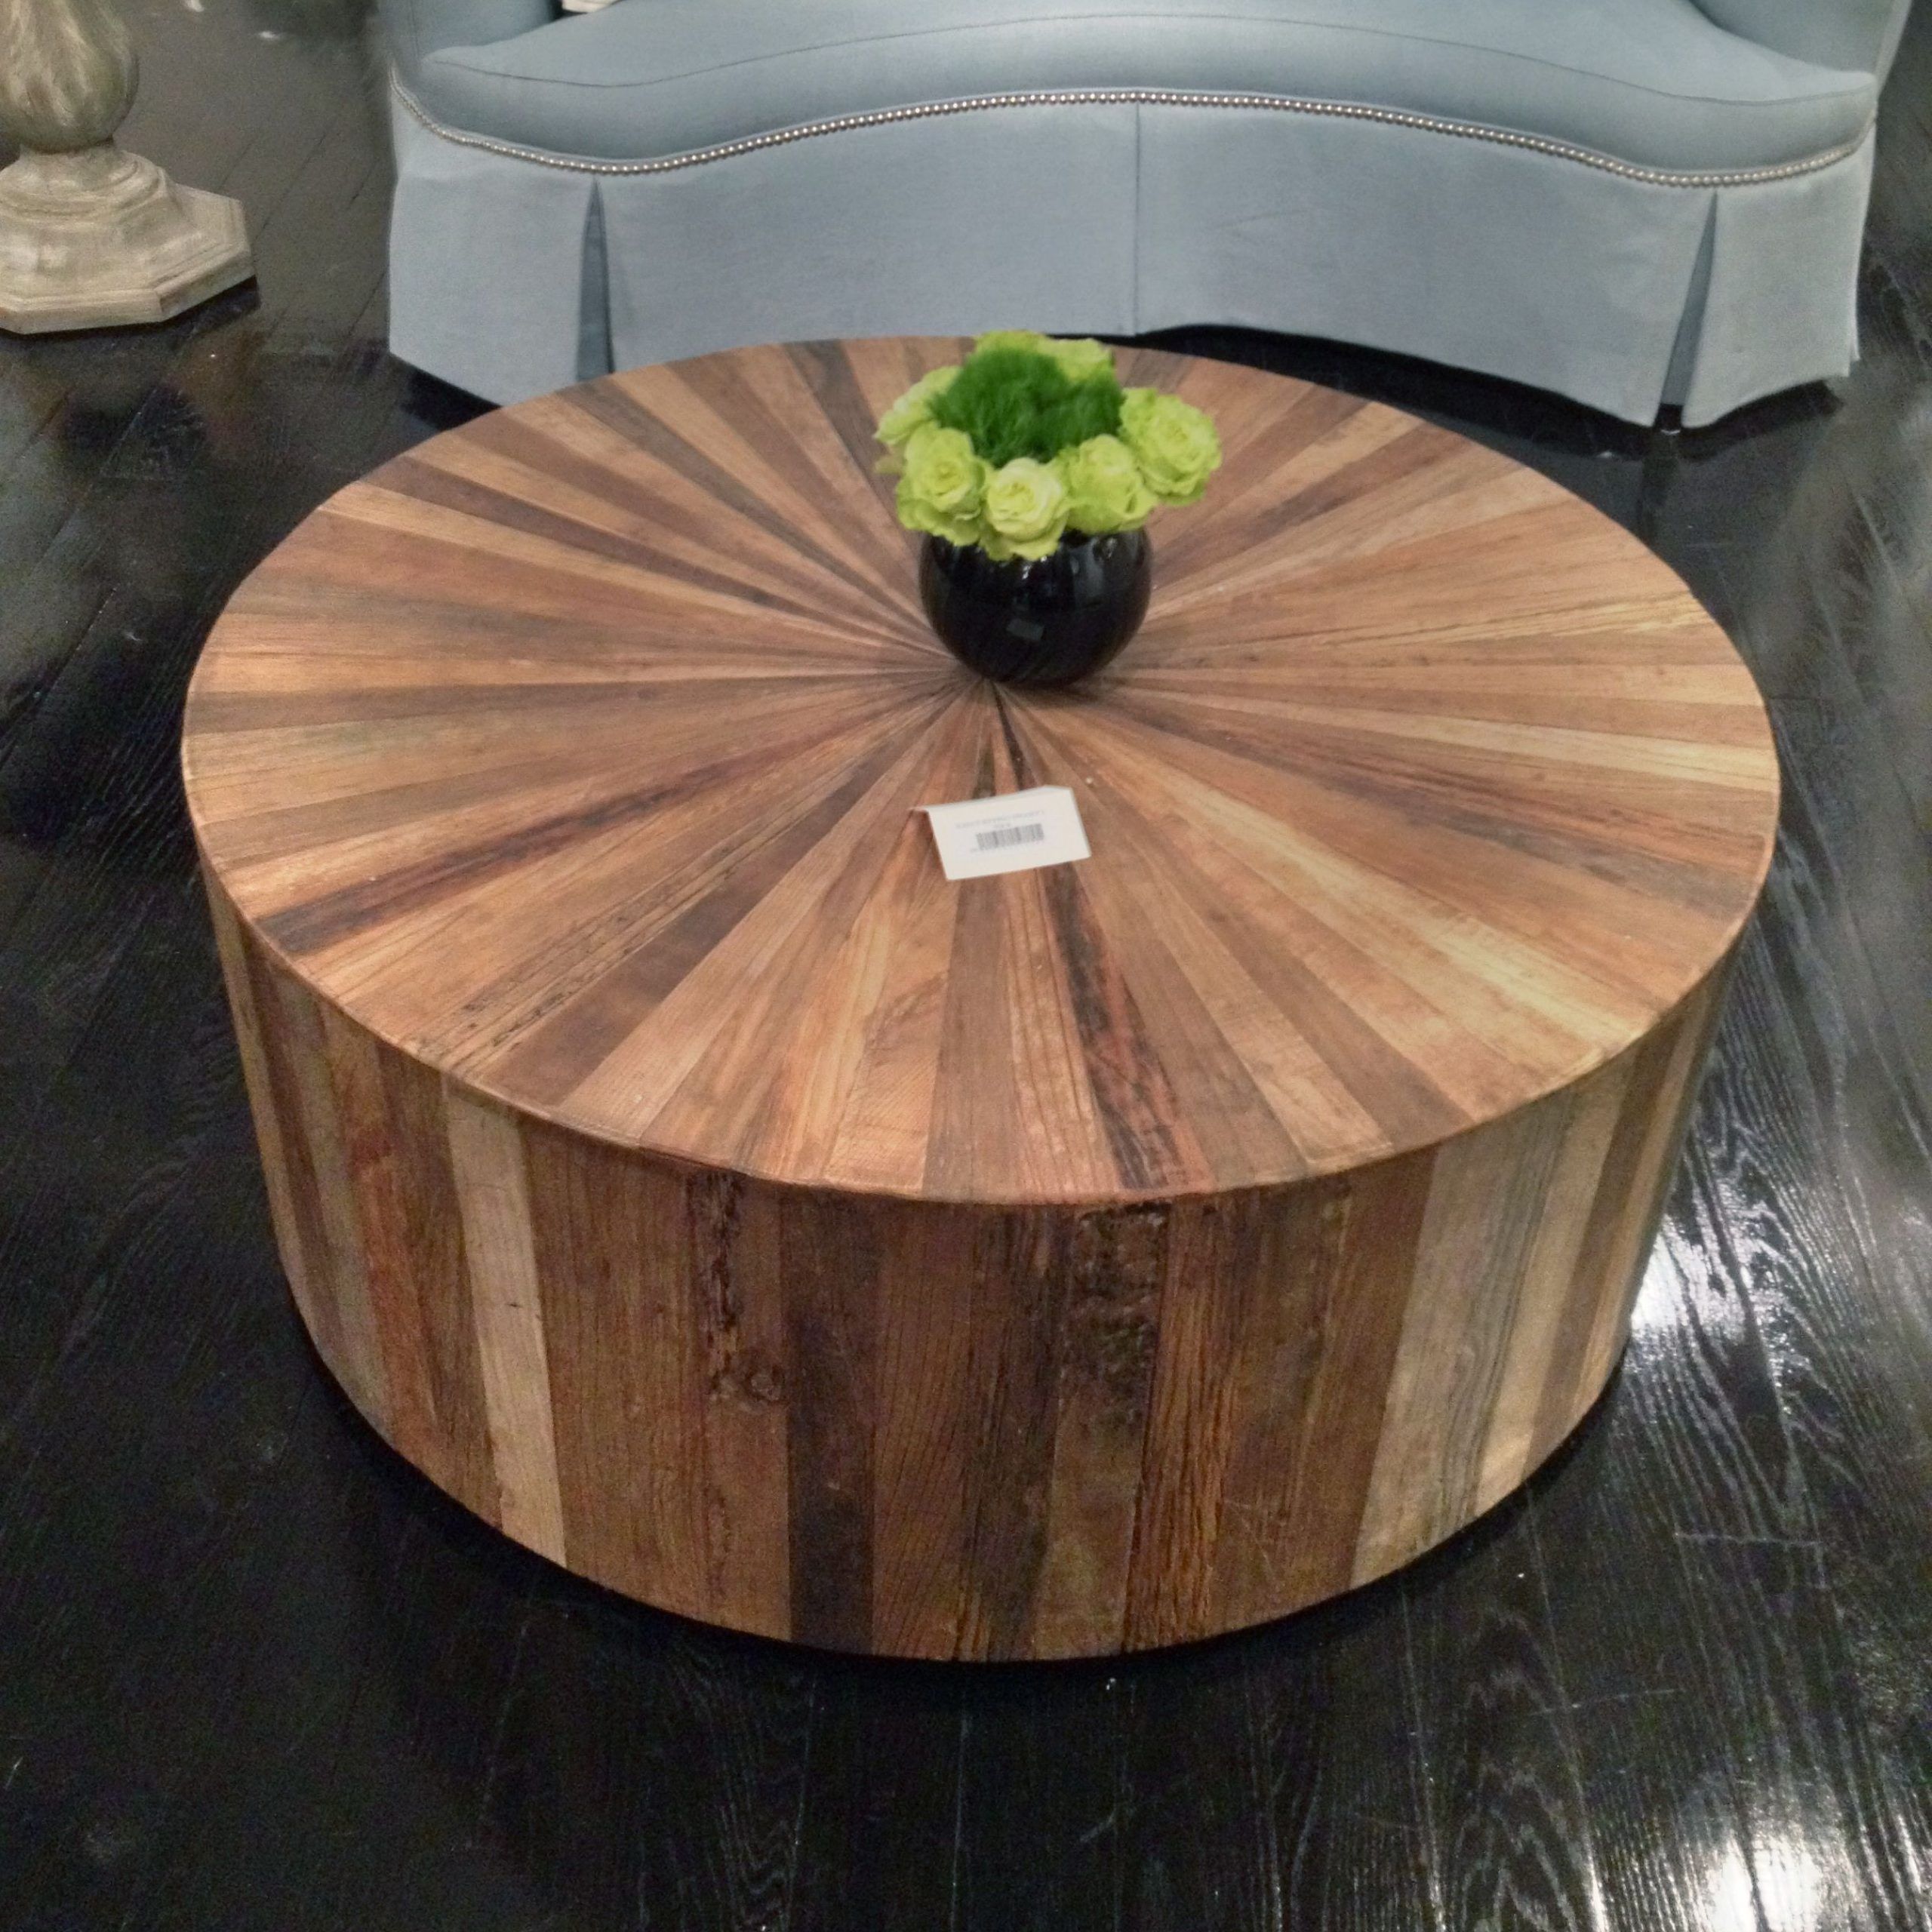 Most Recently Released Round Coffee Tables With Storage With Regard To Round Wood Coffee Tables With Storage : Yj Round Storage Coffee Table (View 10 of 15)